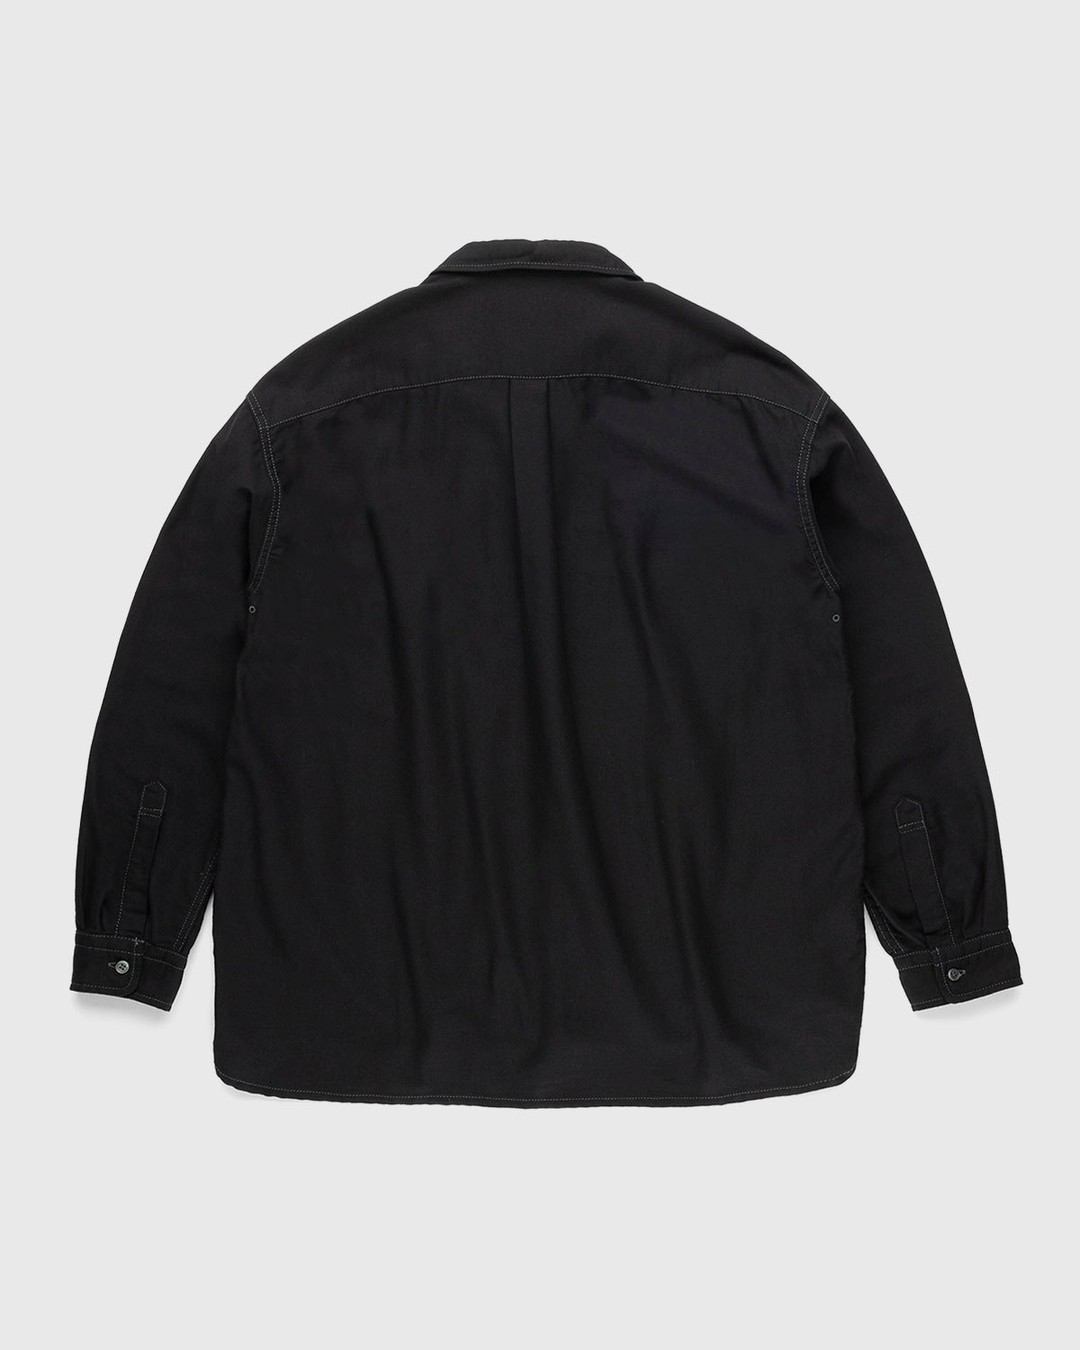 And Wander – Thermonel Pullover Shirt (M) Black - Overshirt - Black - Image 2